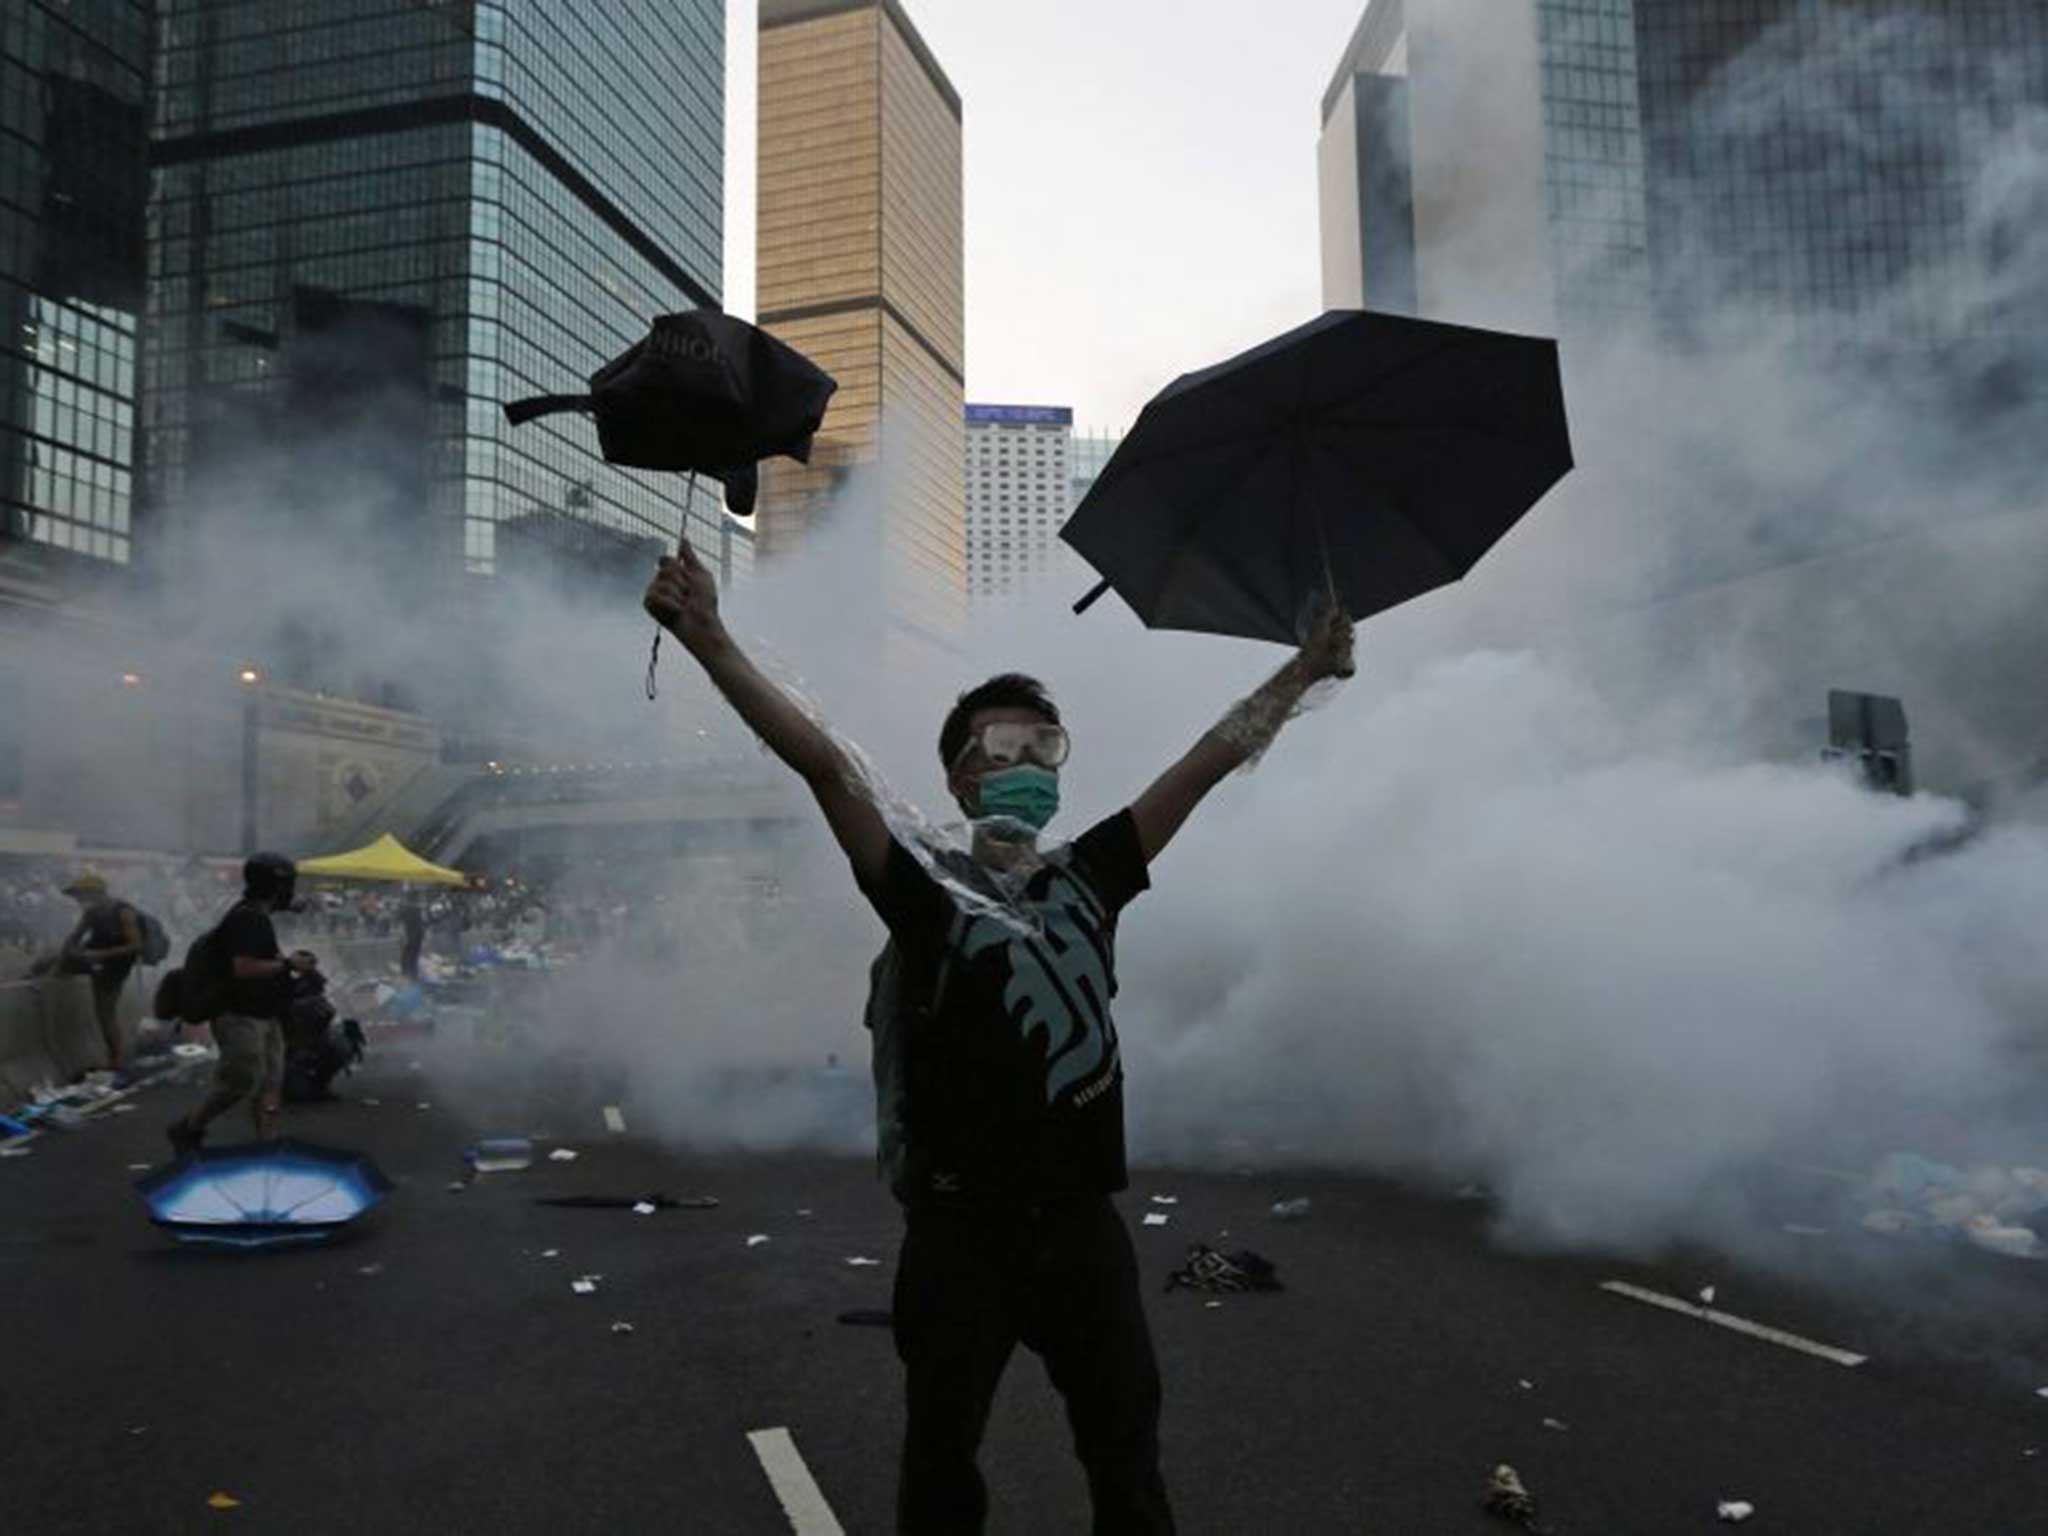 A Hong Kong protester raises his umbrellas in front of tear gas in September